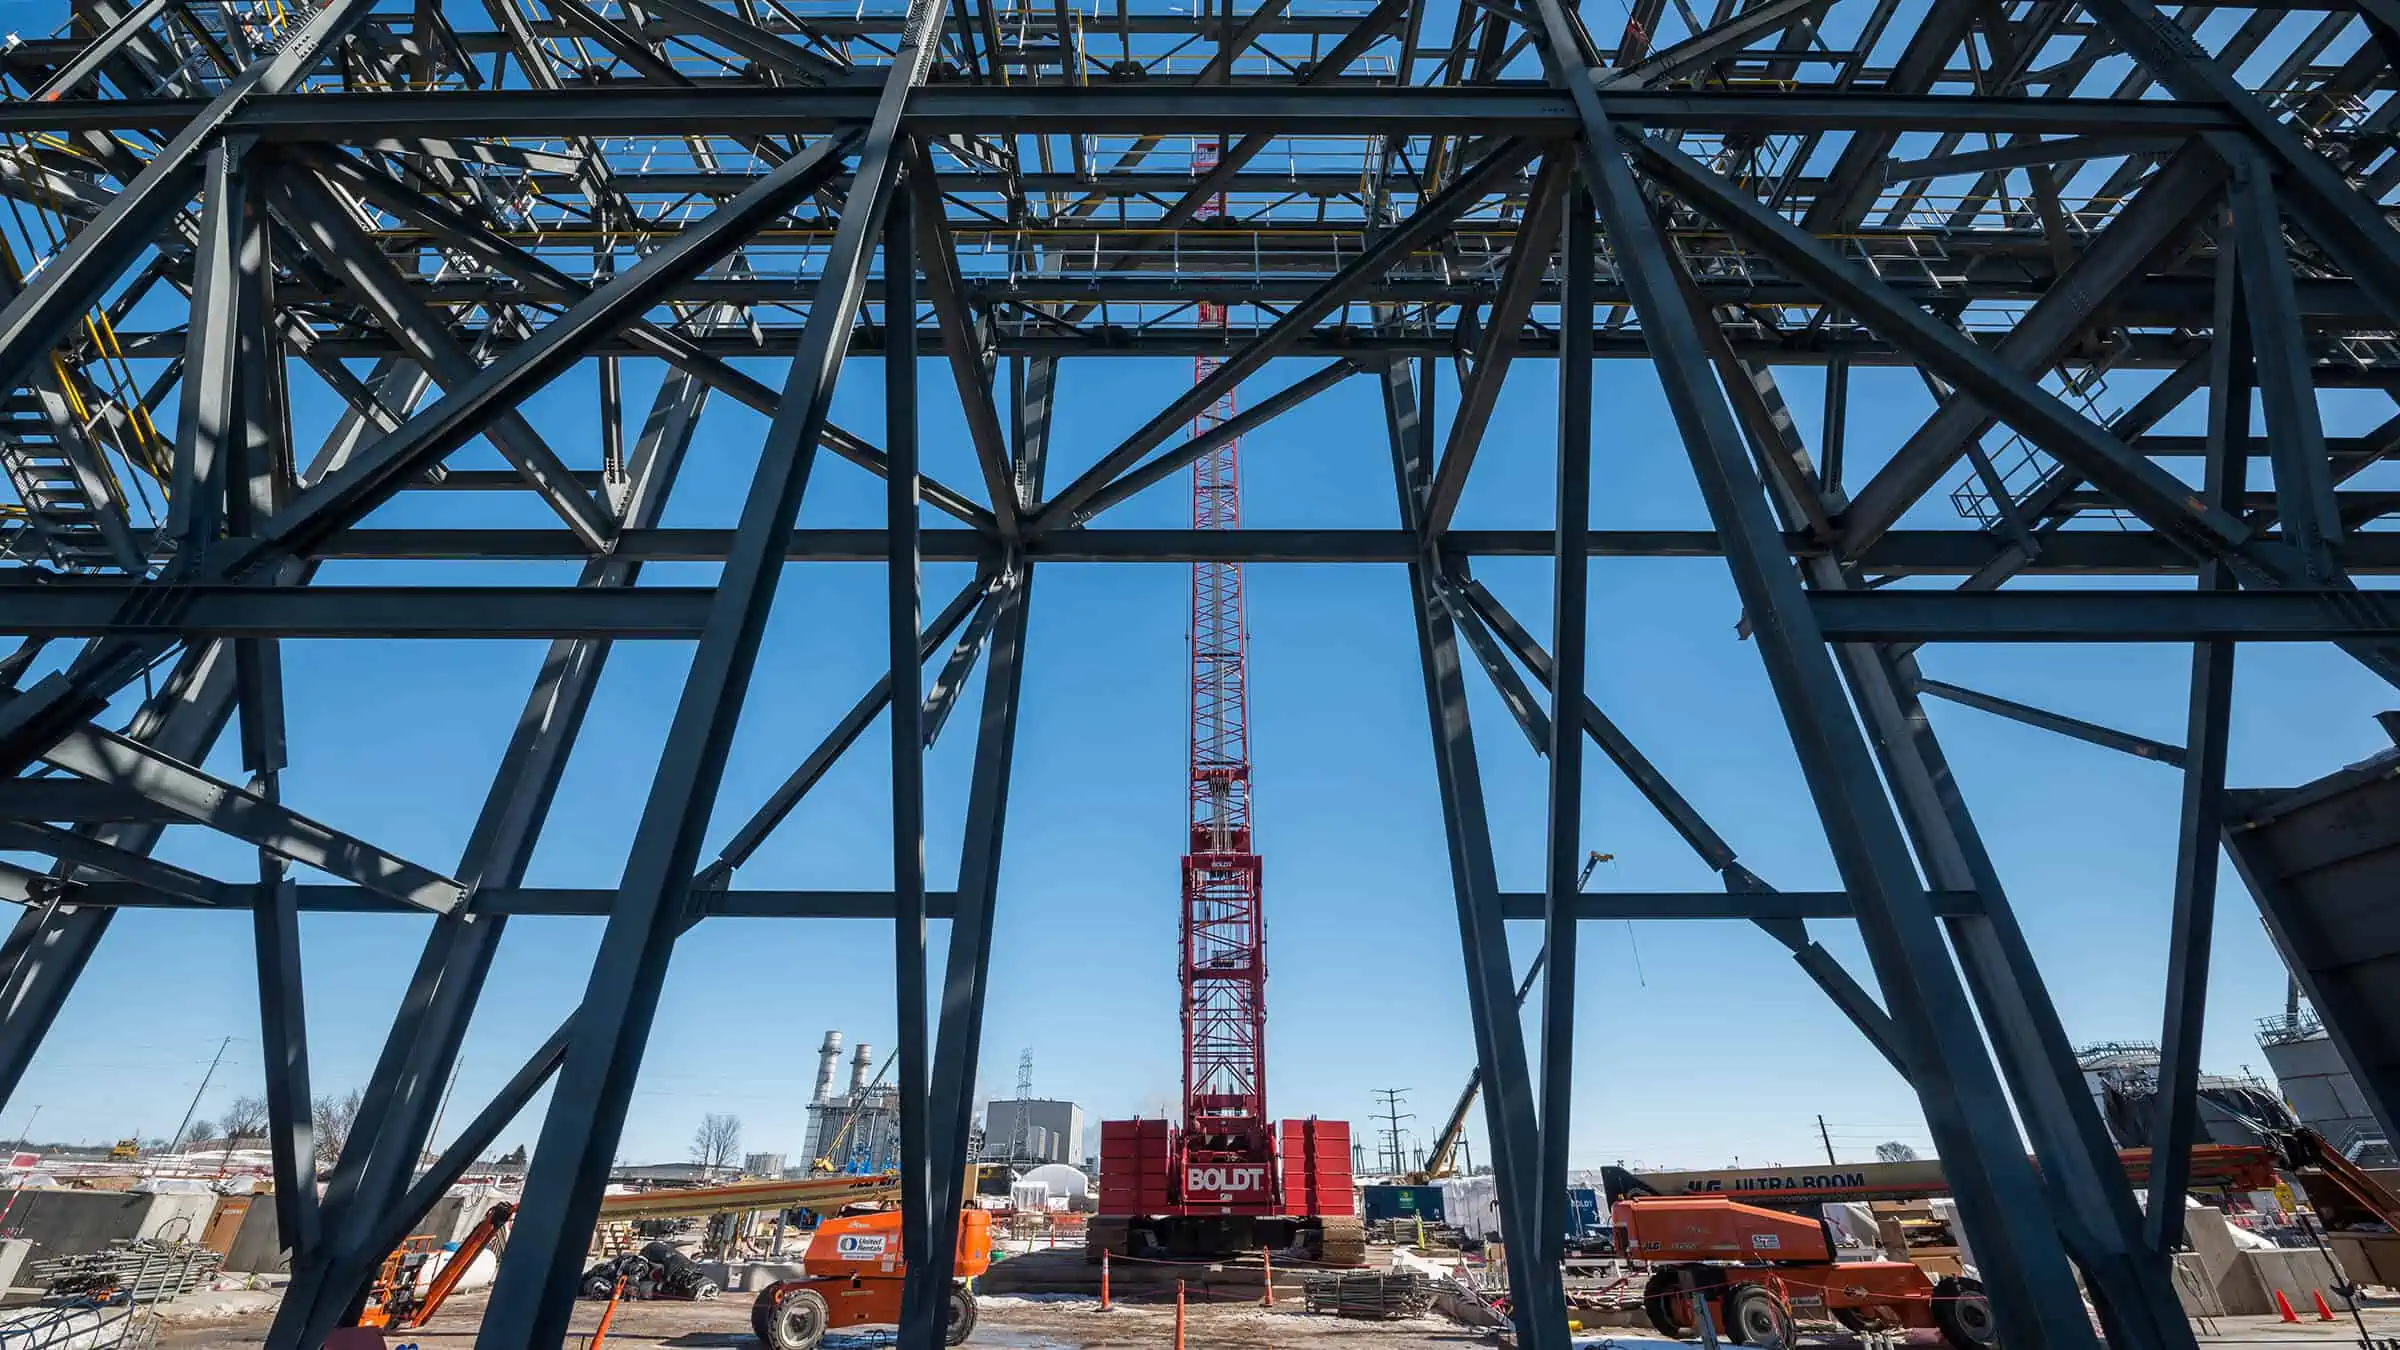 Structural steel framework in foreground with crane in background